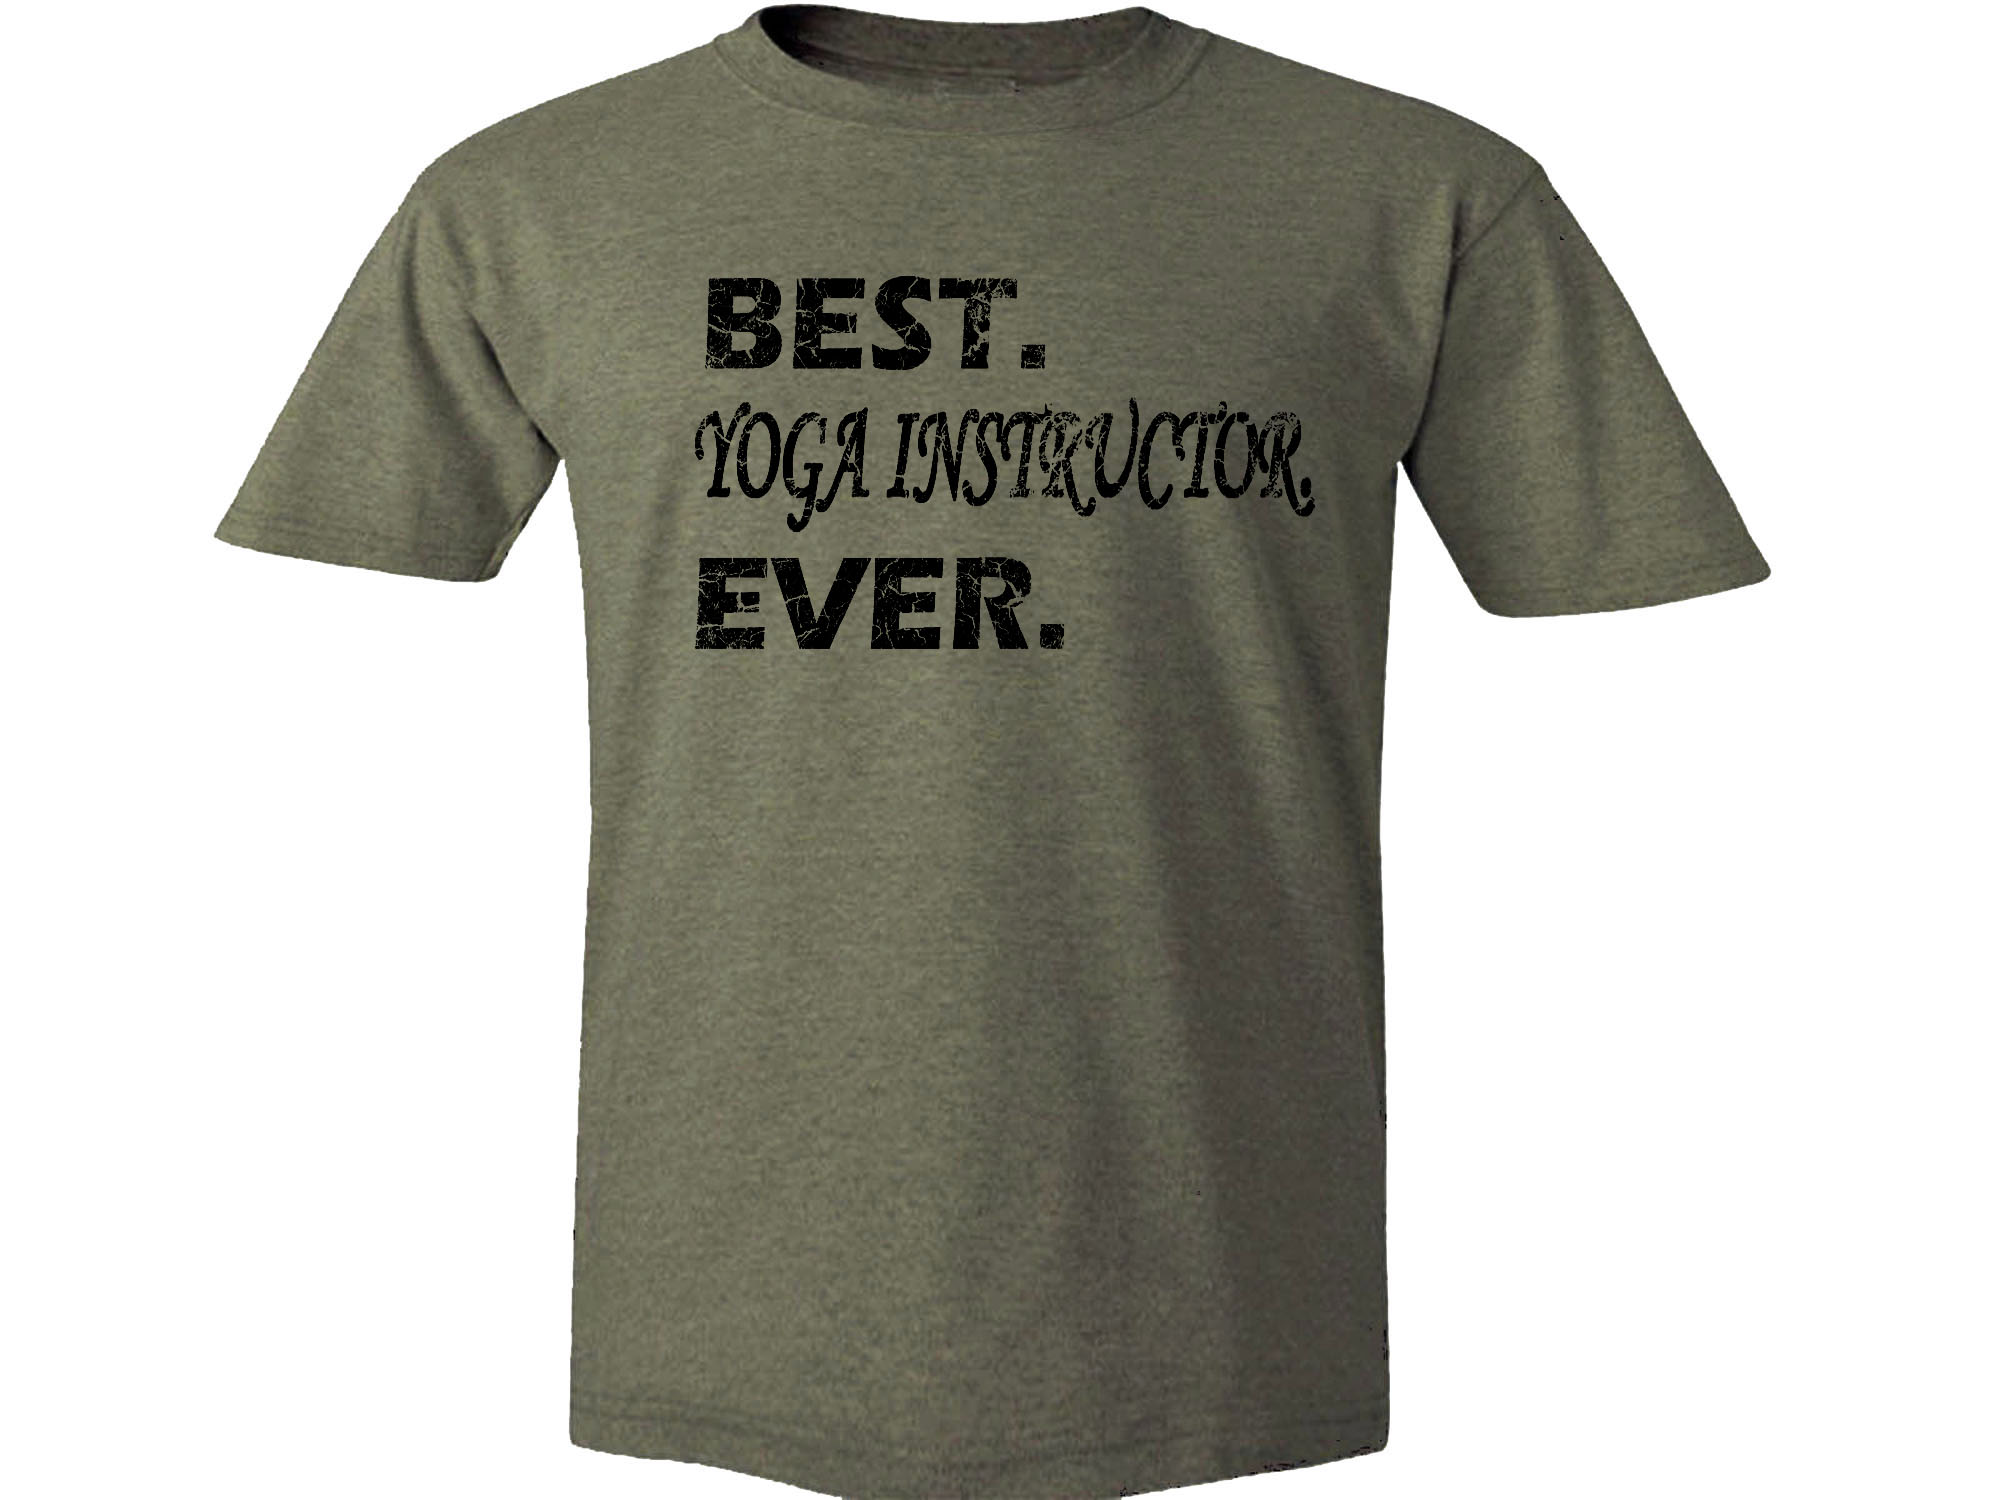 Best Yoga Instructor ever distressed print t-shirt